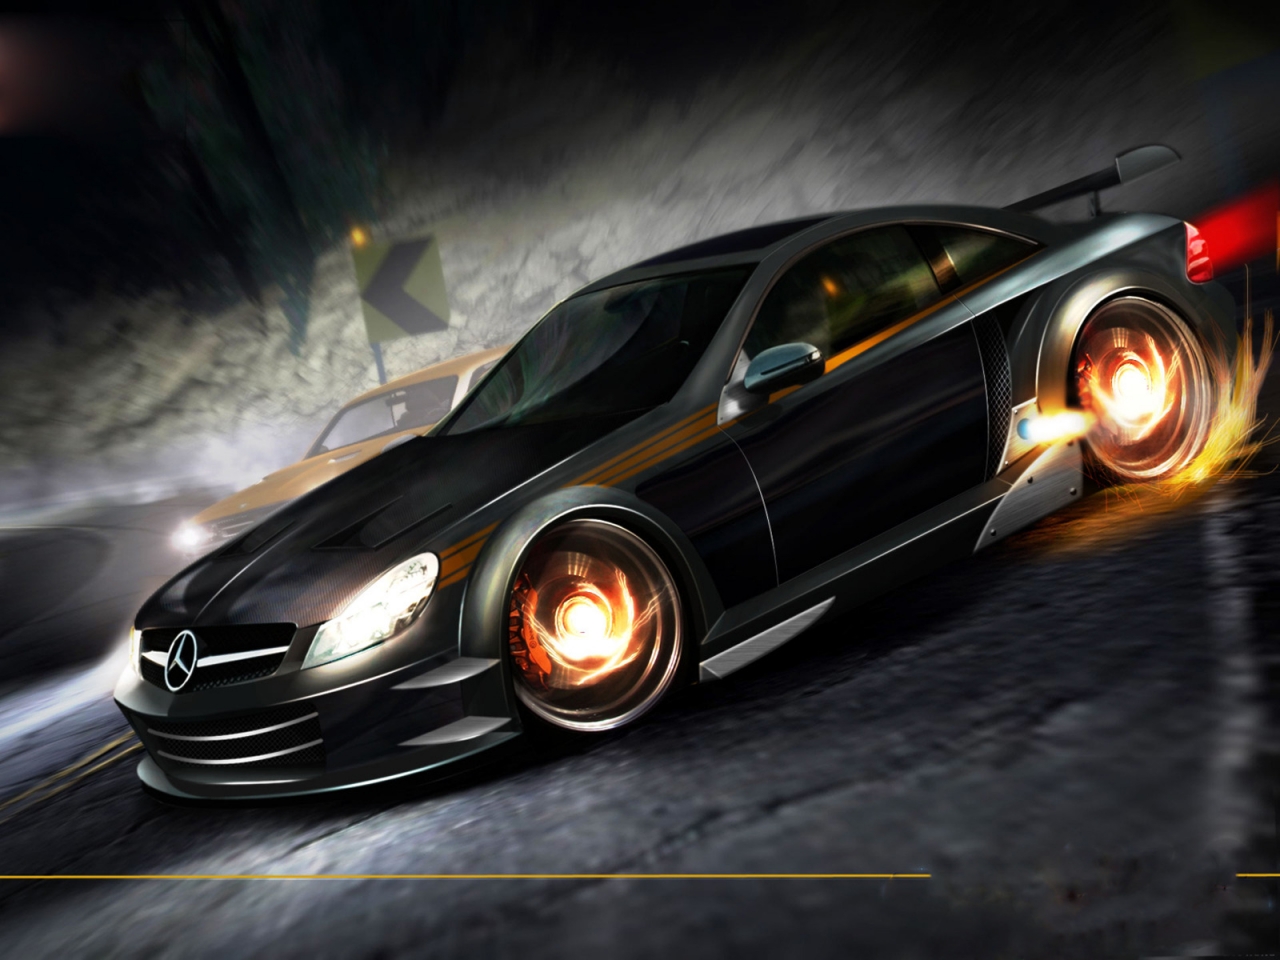 NFS Carbon Mercedes for 1280 x 960 resolution